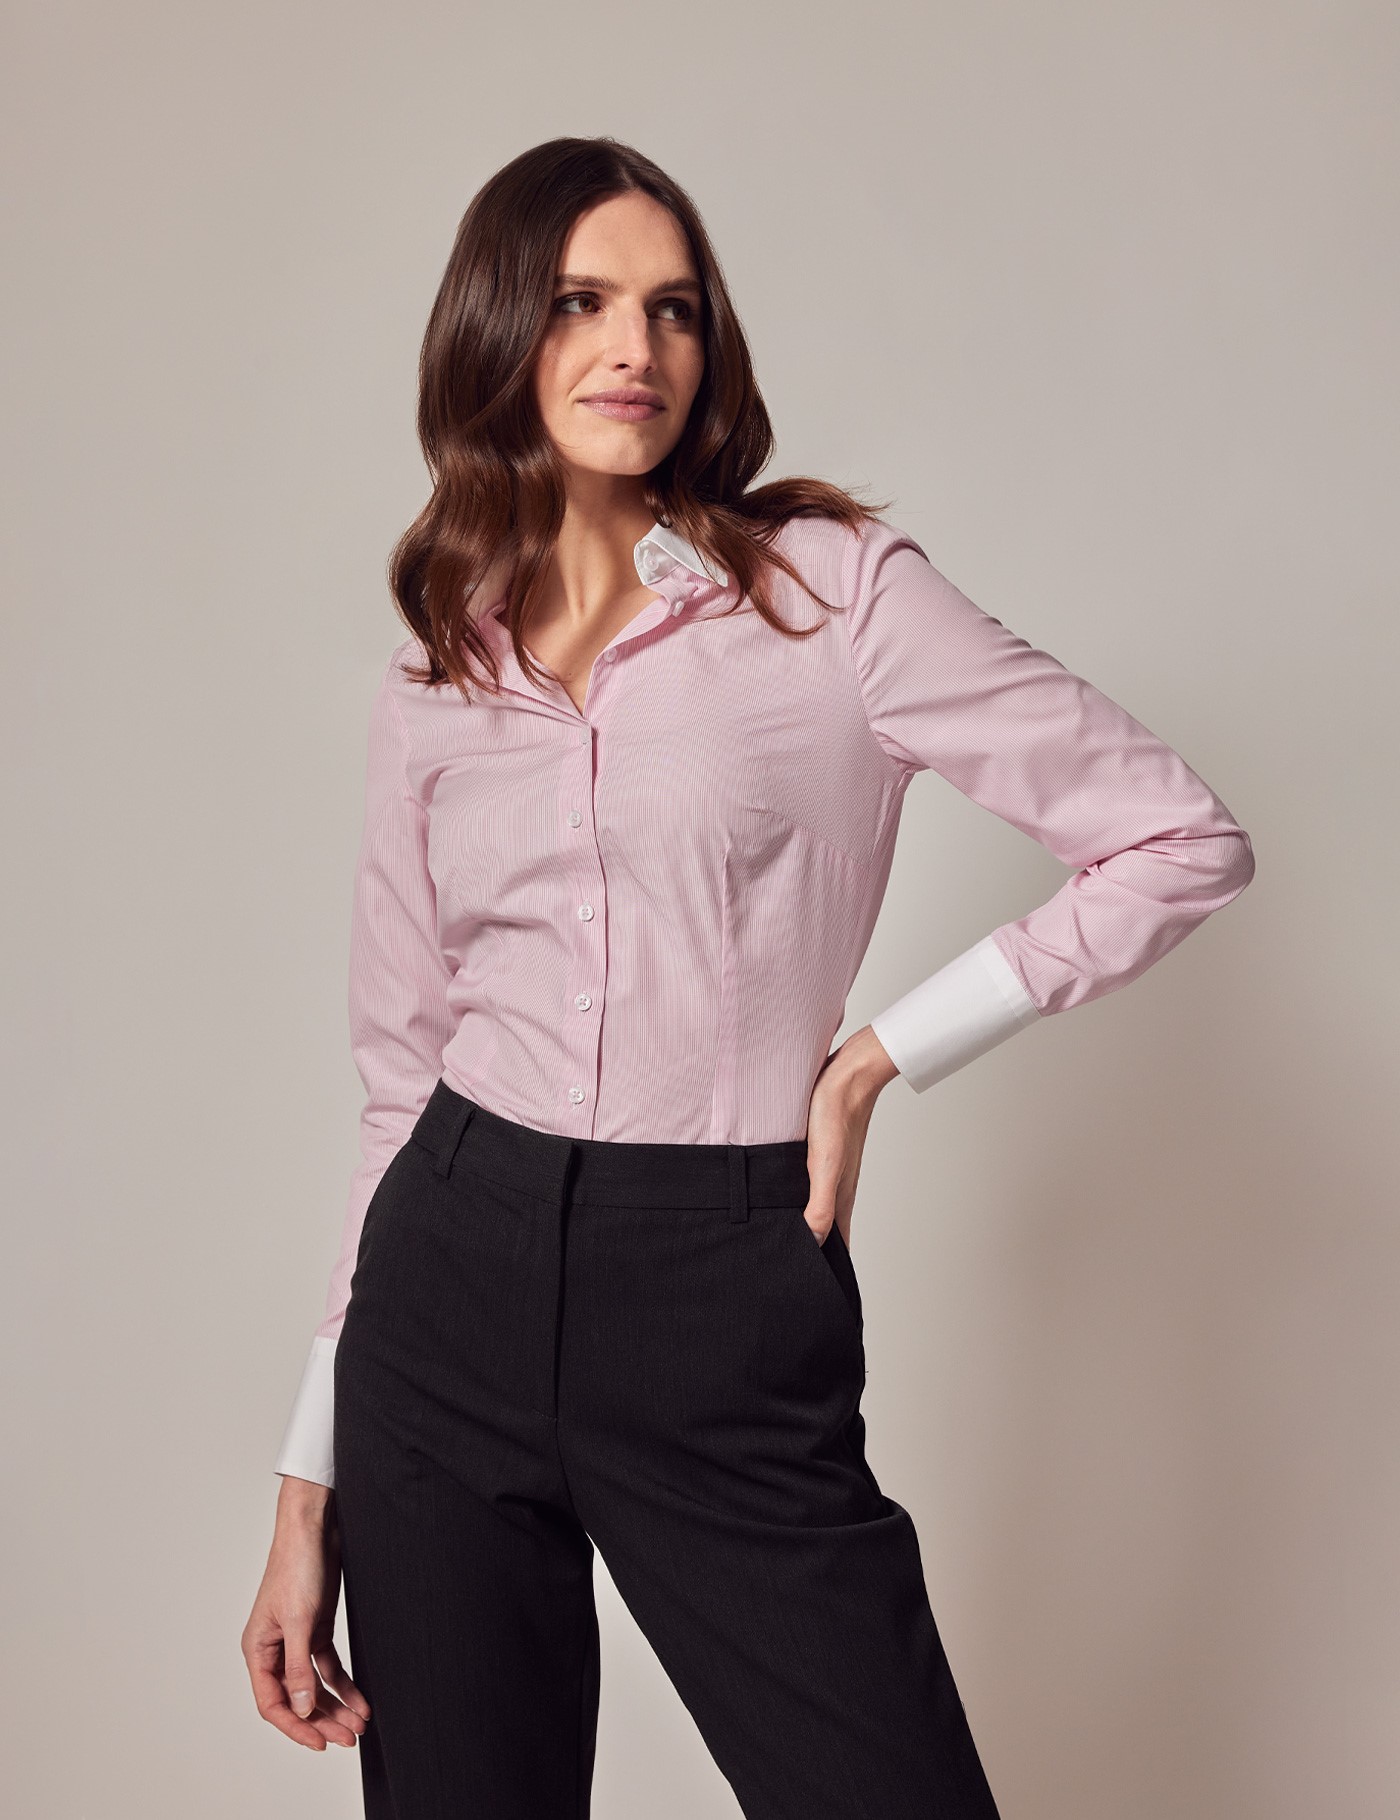 Women's Executive Pink & White Pin Stripe Fitted Shirt With White ...